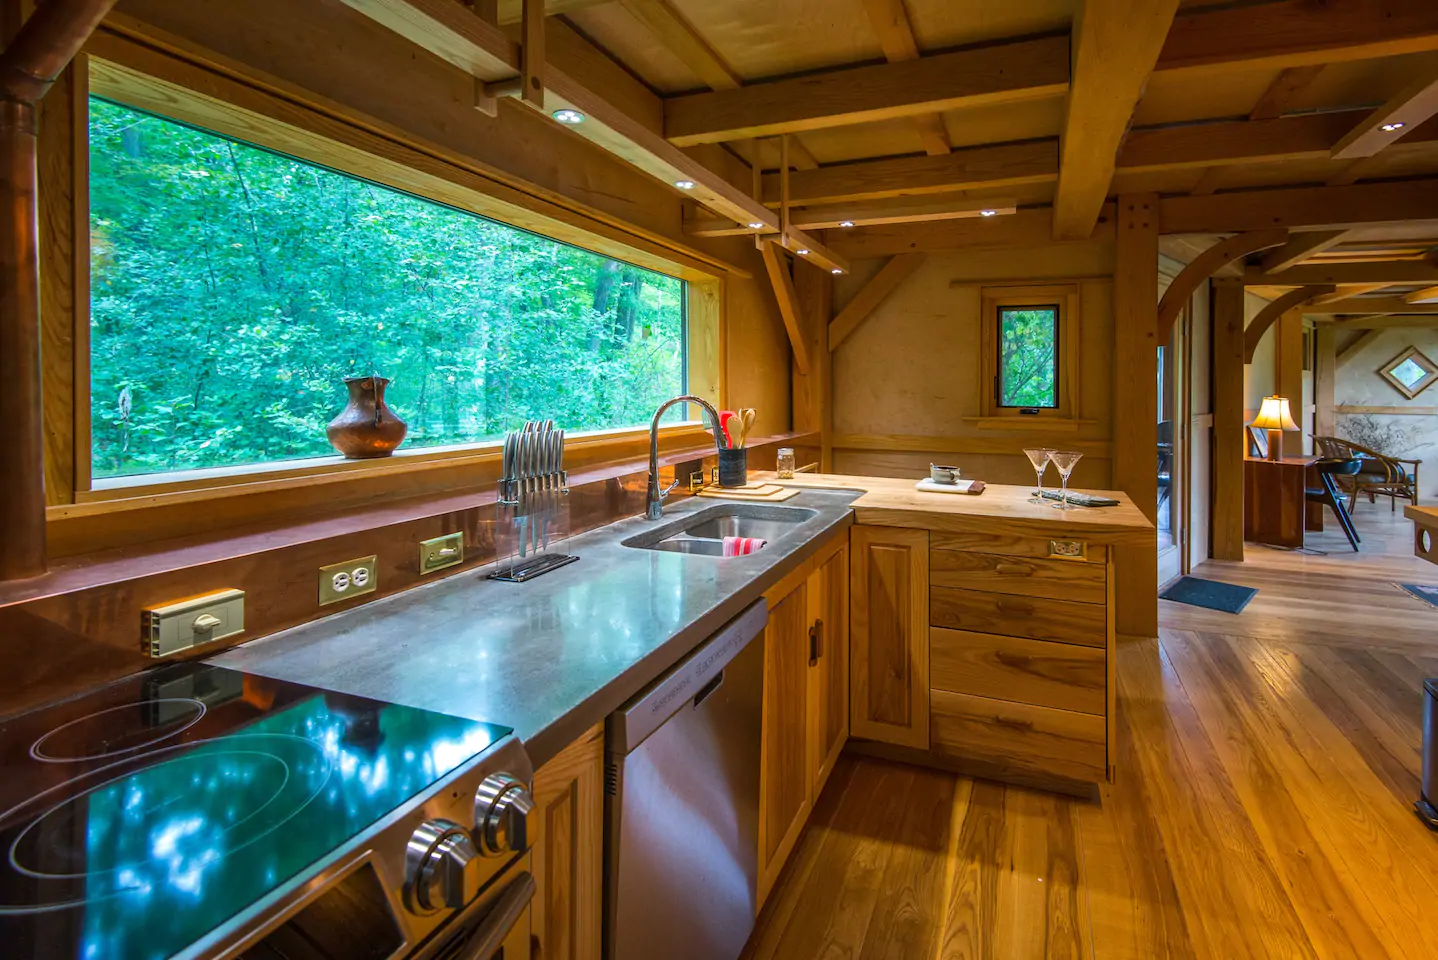 Lakeside Timberframe Cabin kitchen with gorgeous outdoor views